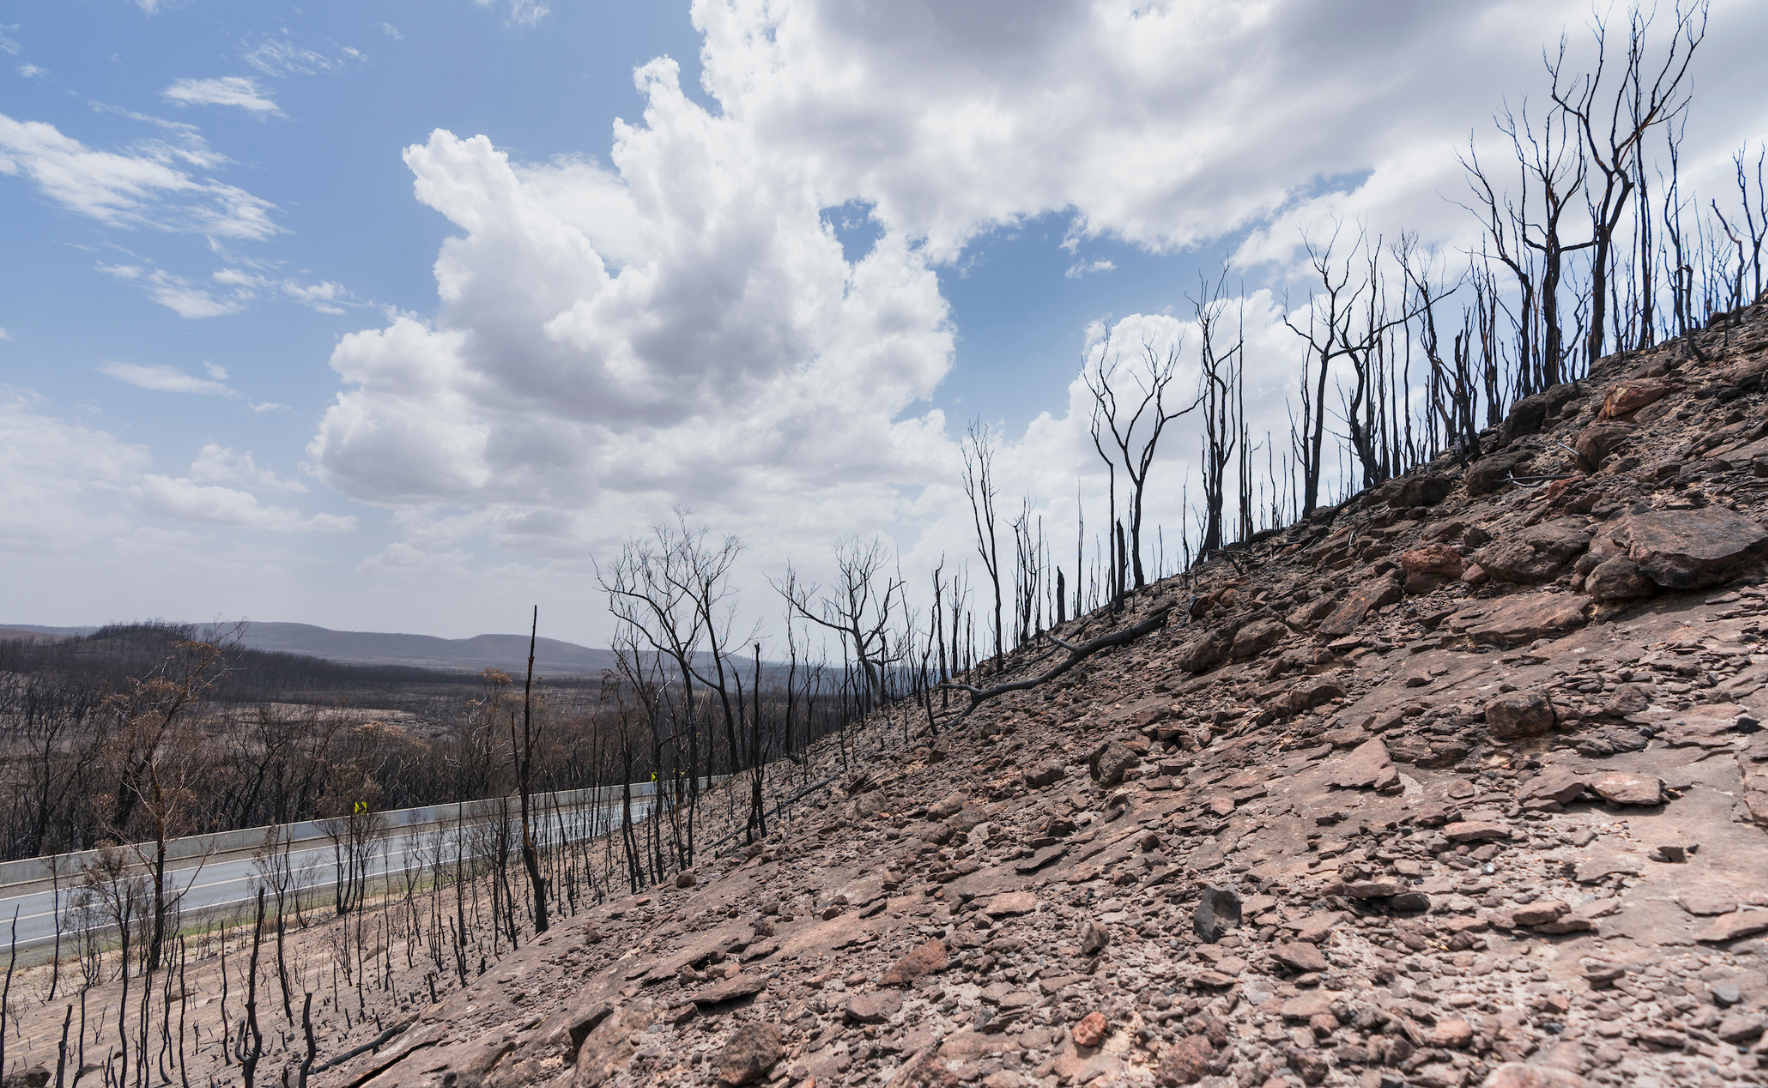 A national park devastated by bushfires. Spindly burned trees with all their lives stripped stand under a blue sky.